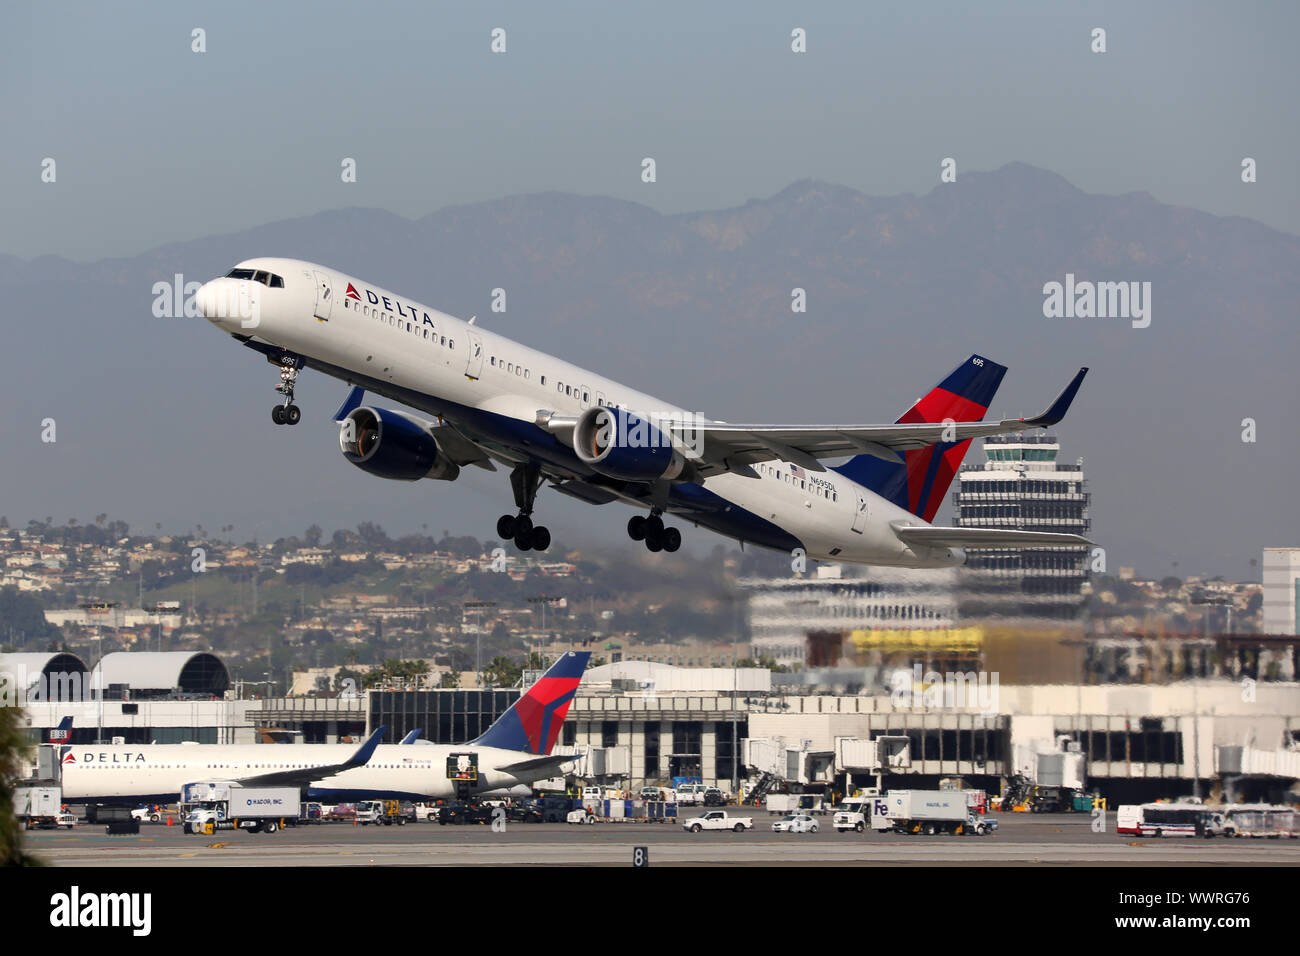 Delta Air Lines Boeing 757-200 aircraft Los Angeles Airport Stock Photo